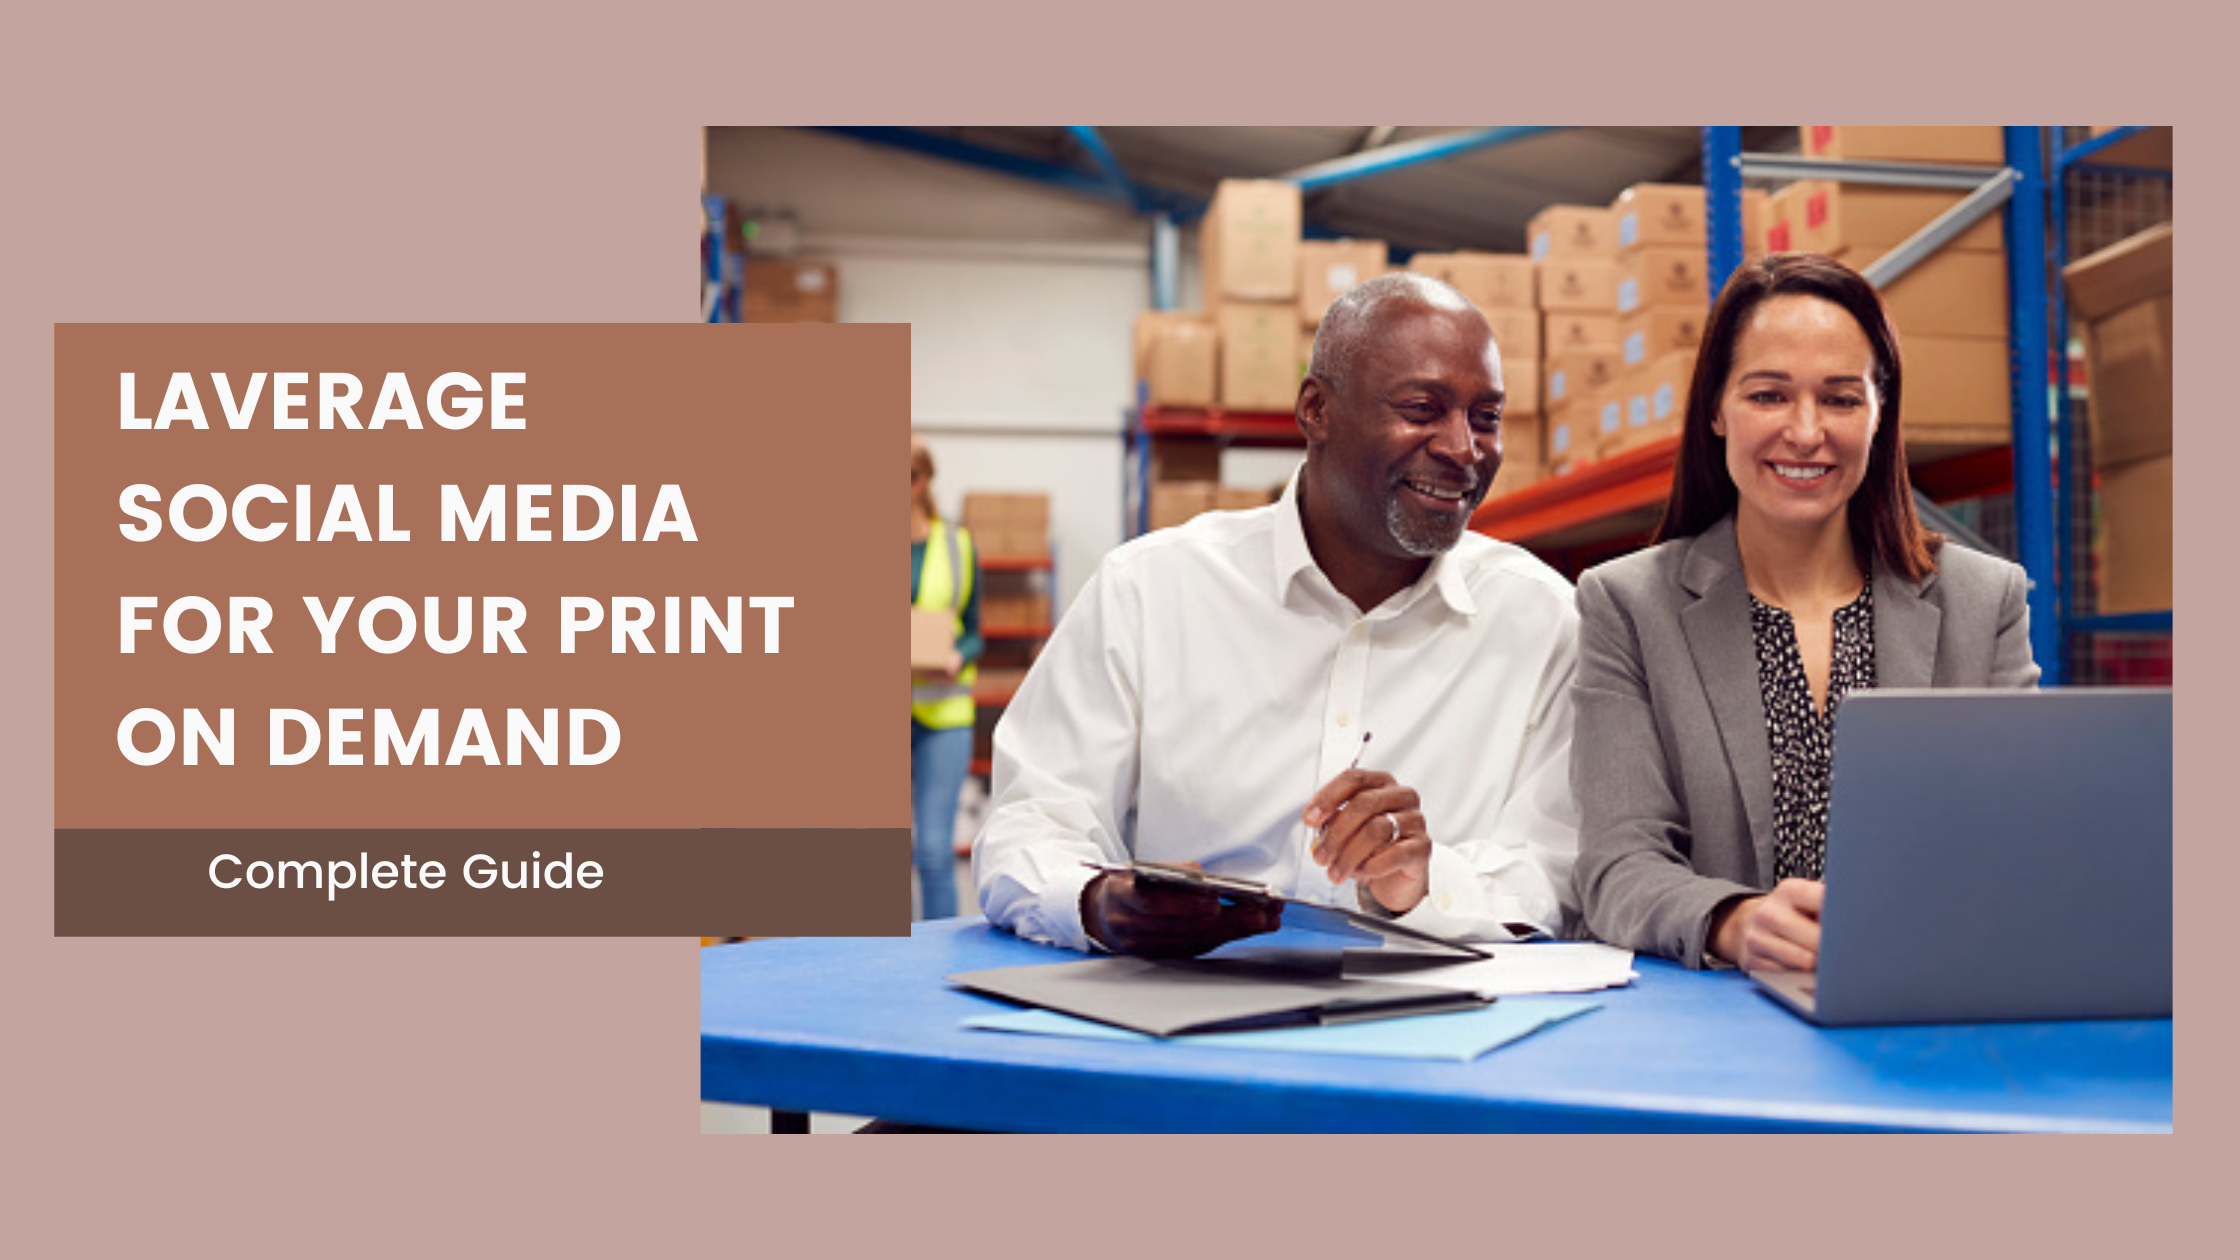 How to Leverage Social Media for Your Print on Demand Business